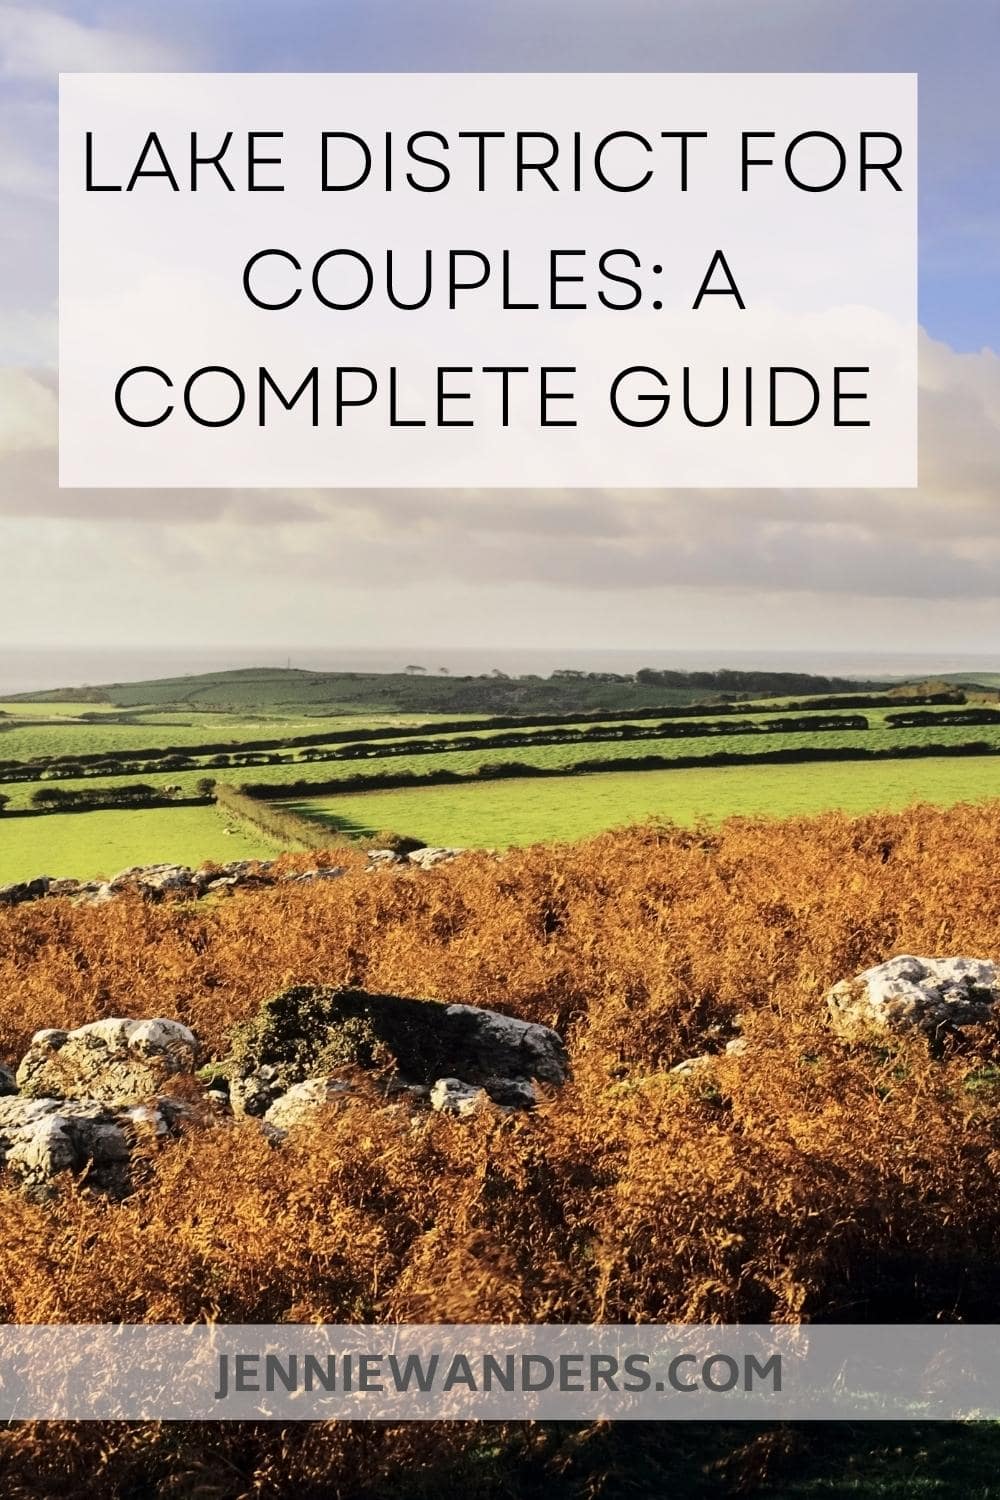 Lake District for Couples